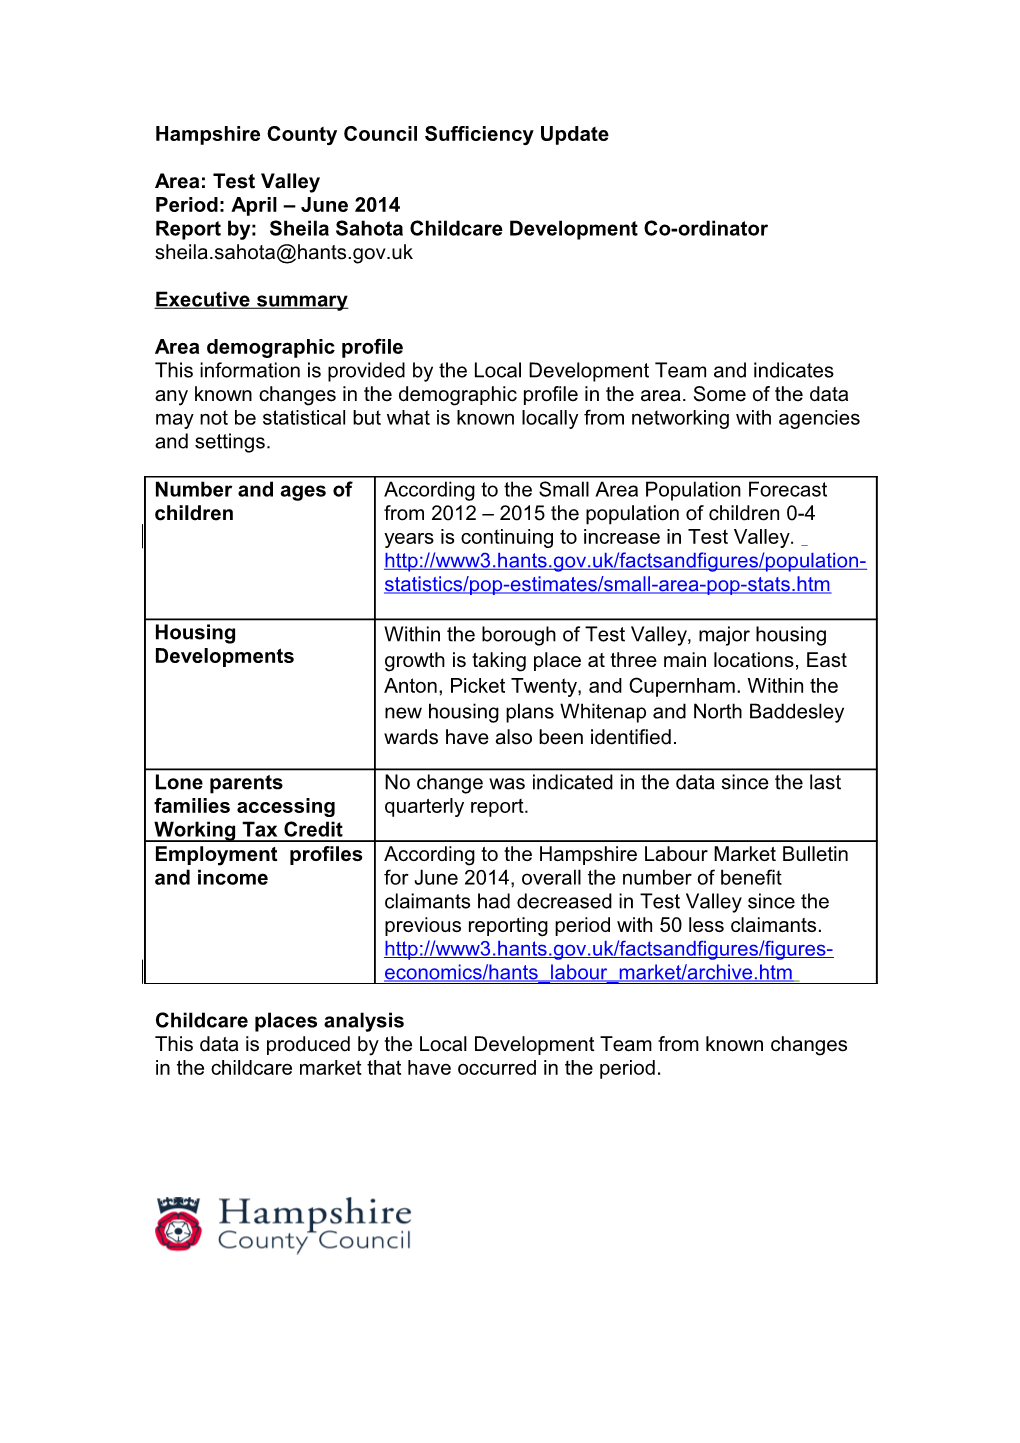 Hampshire County Council Sufficiency Update s3